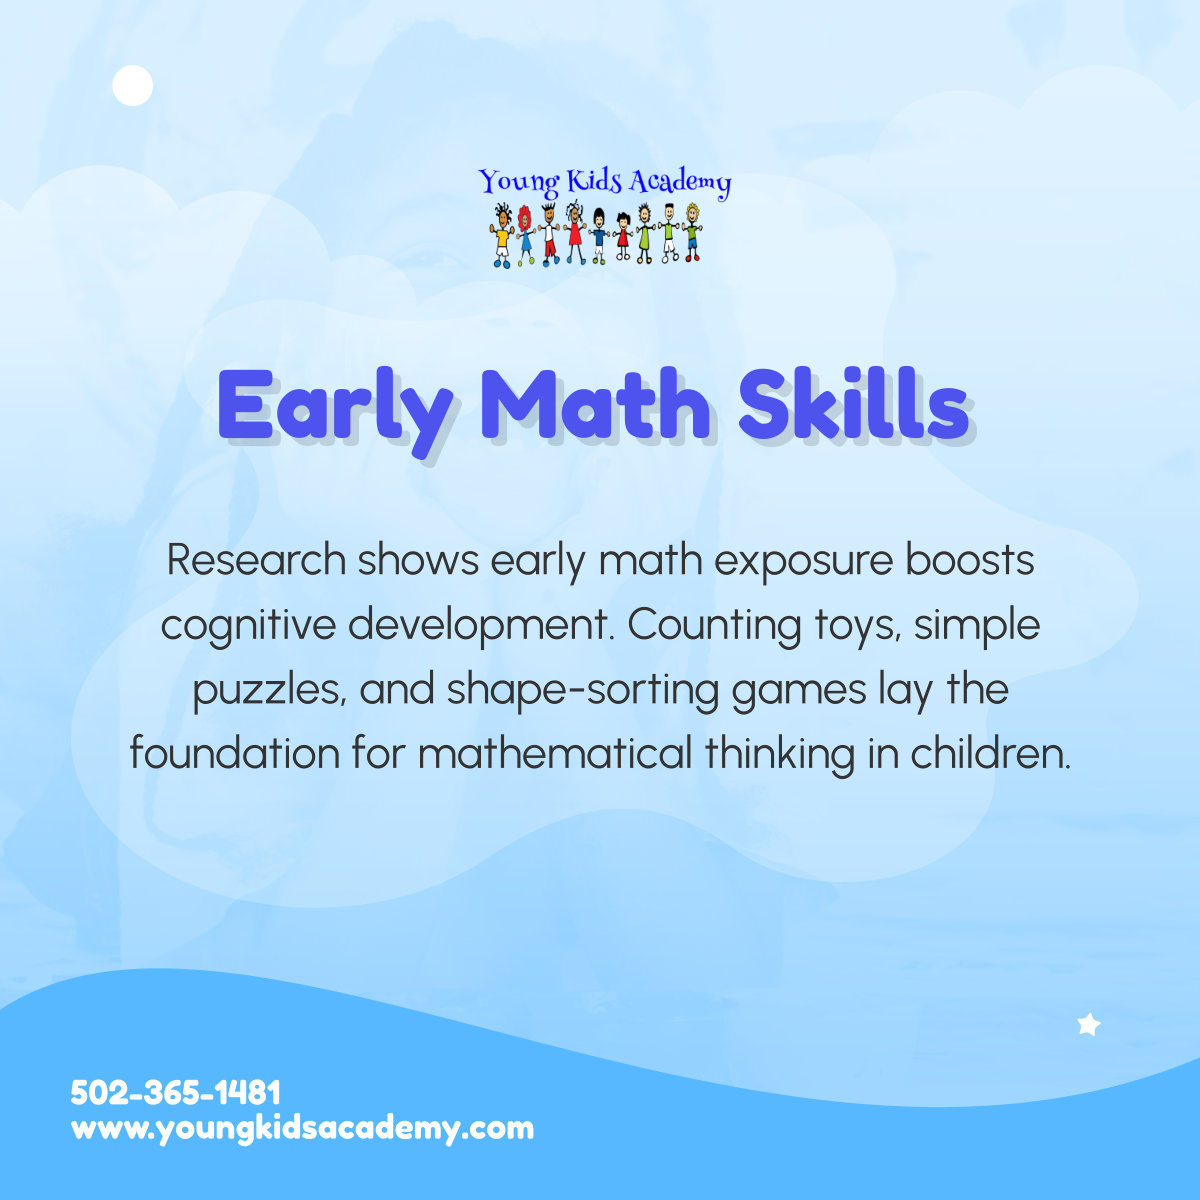 Foster your child's cognitive growth with early math activities. Engage them in counting, sorting, and shape recognition for a solid mathematical foundation. 

#LouisvilleKY #ChildCare #EarlyMath